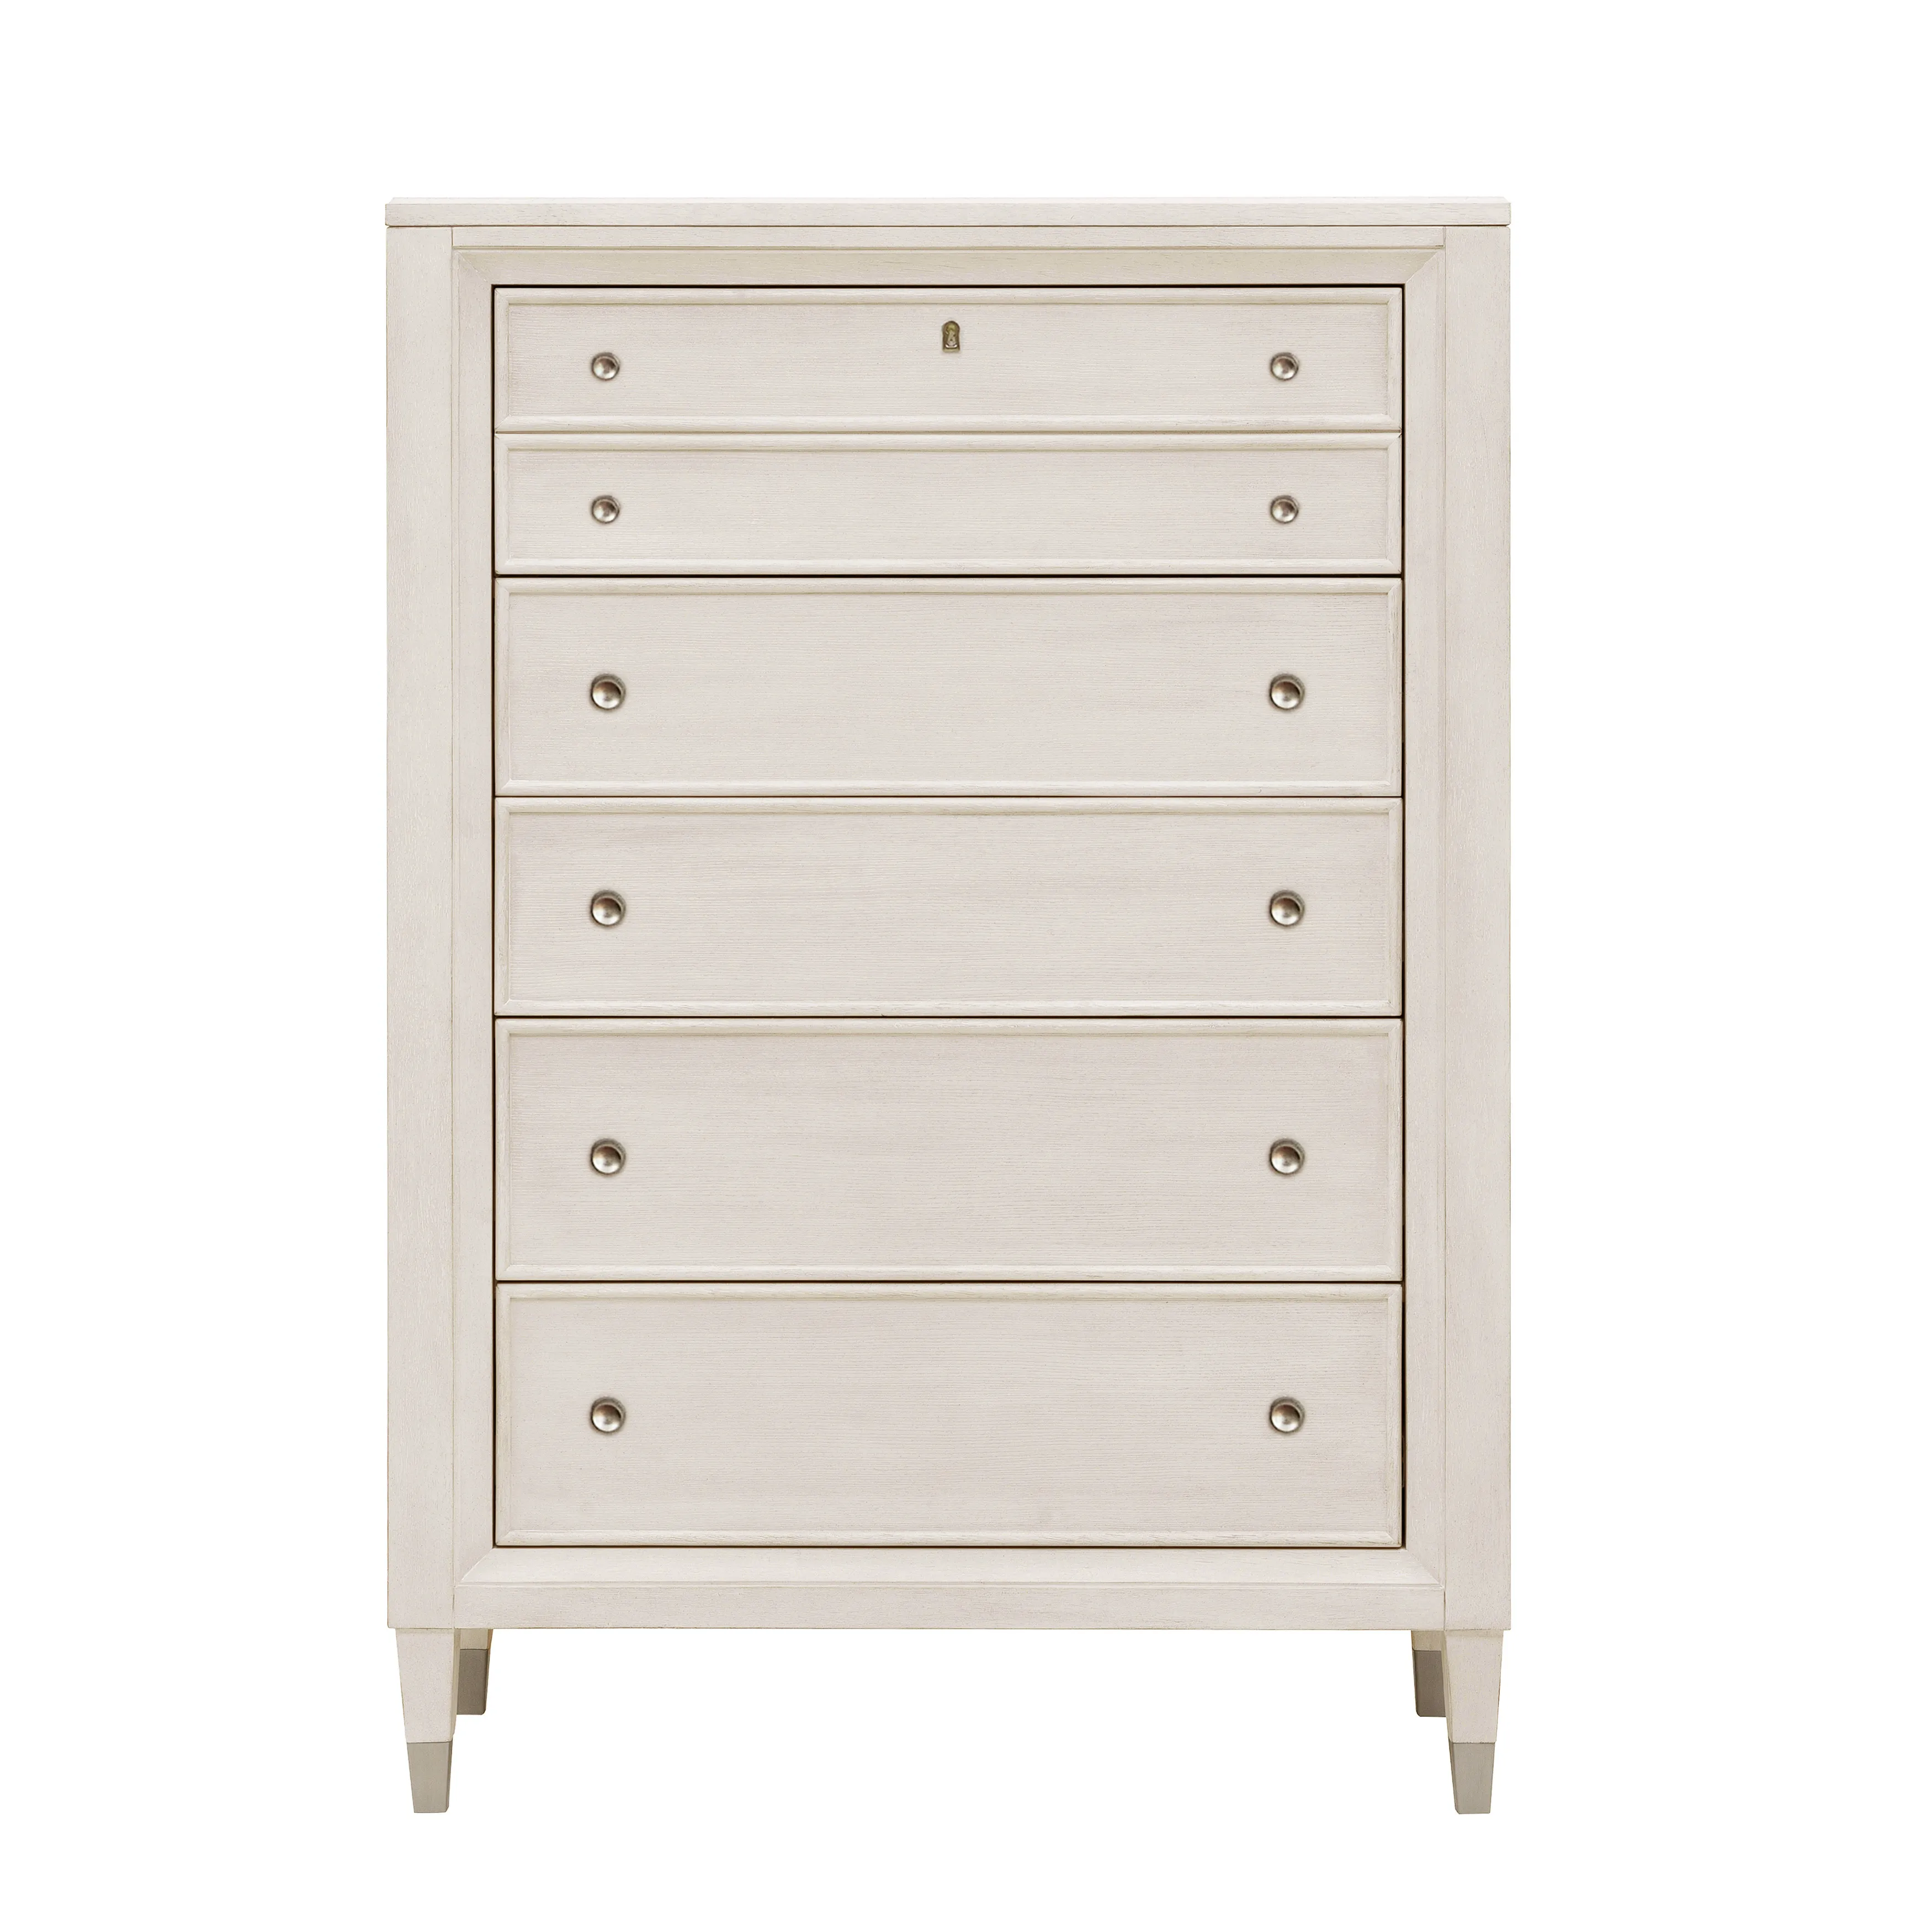 Ashby Place 5-Drawer Chest